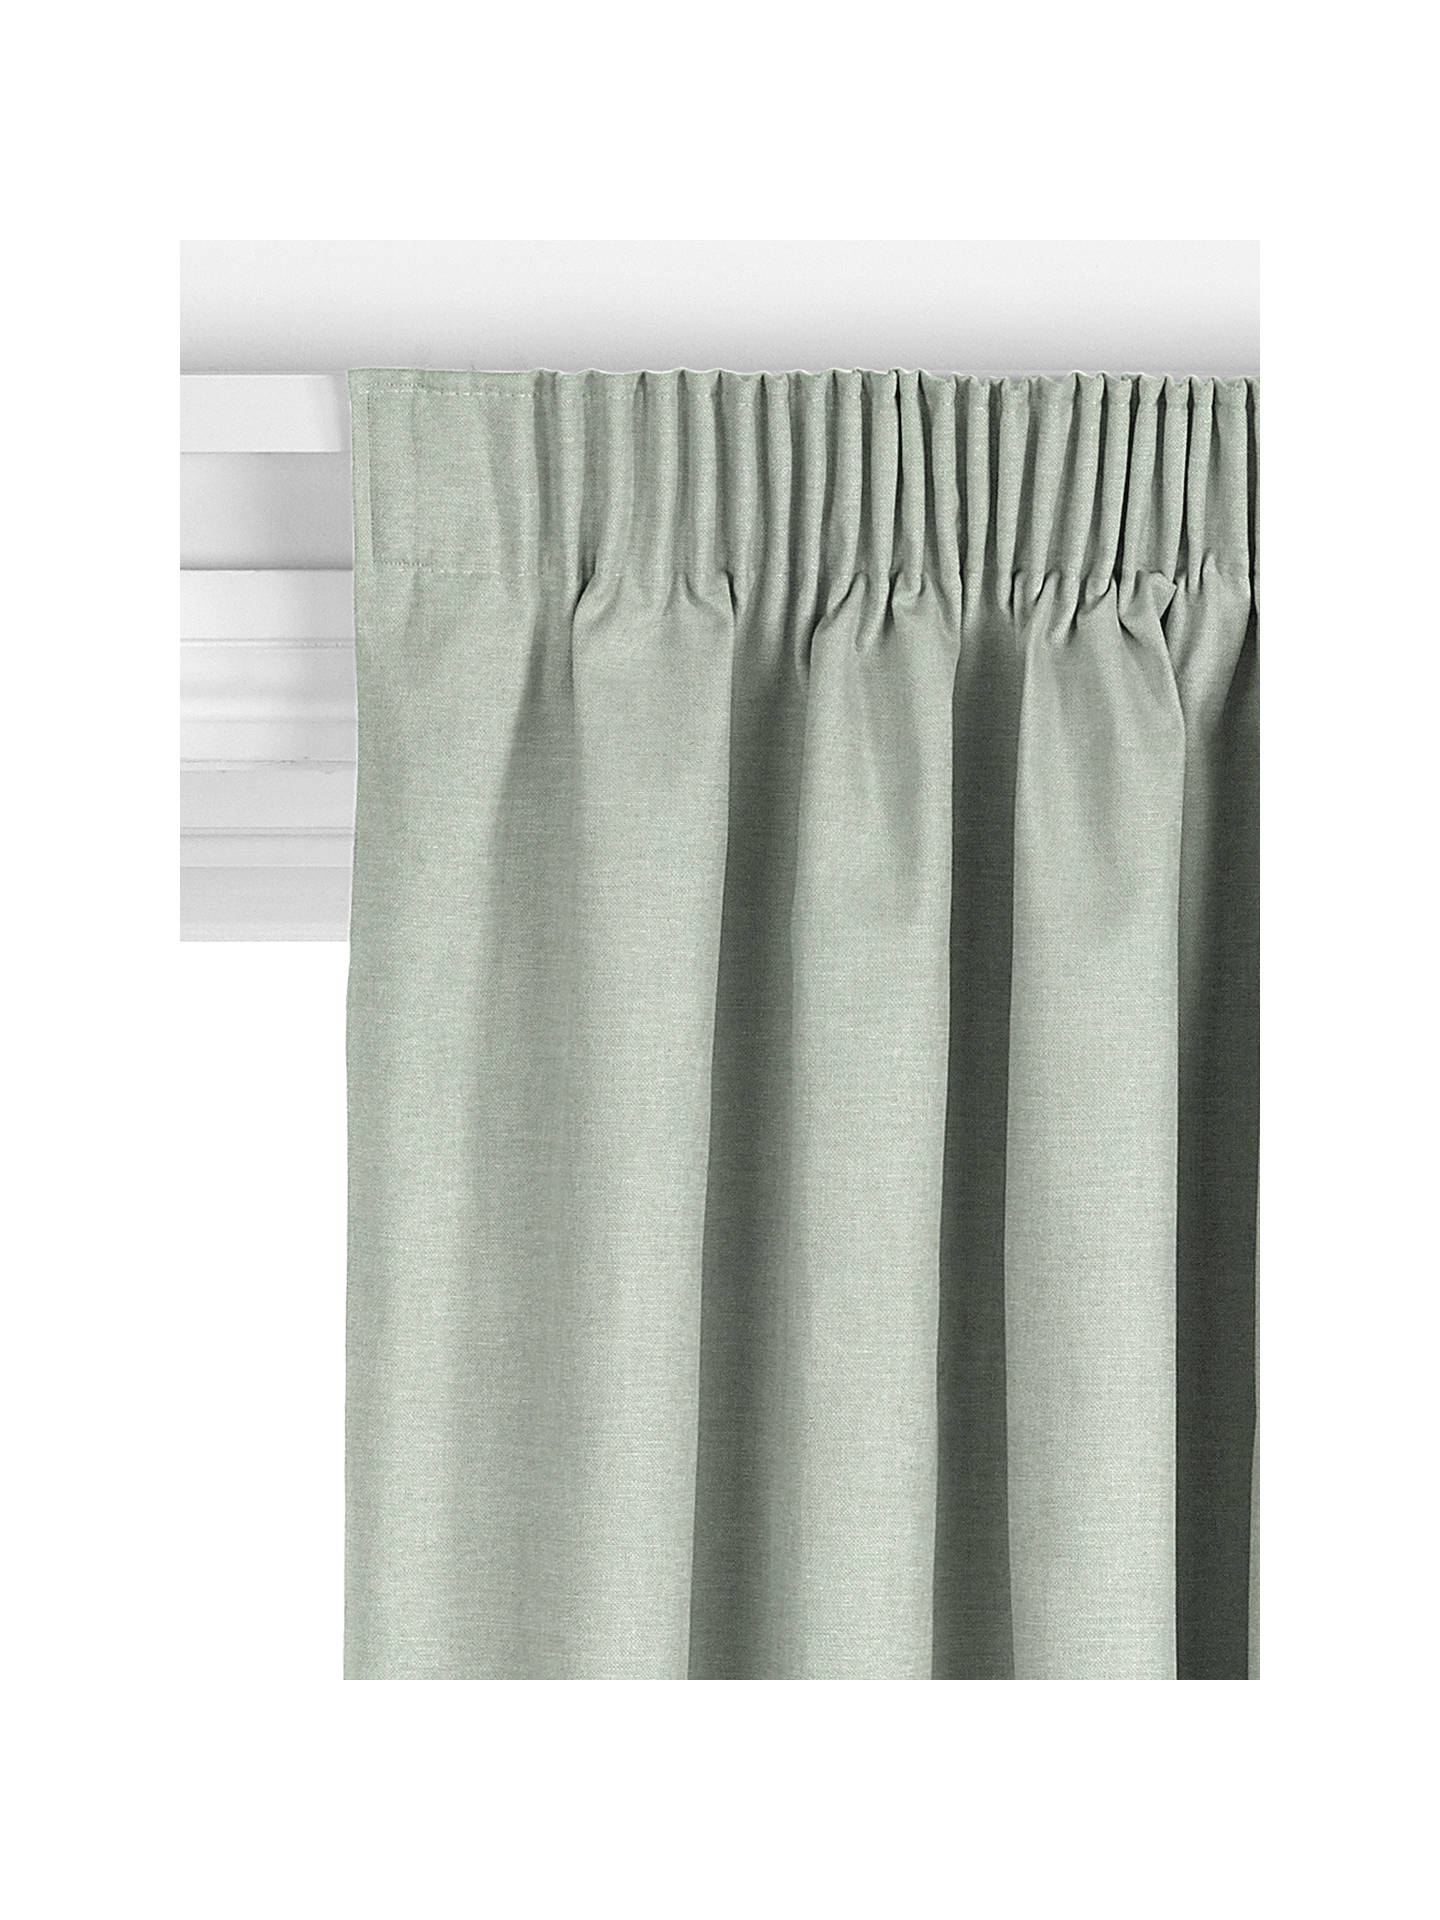 John Lewis Linen Look Made to Measure Curtains, Lichen